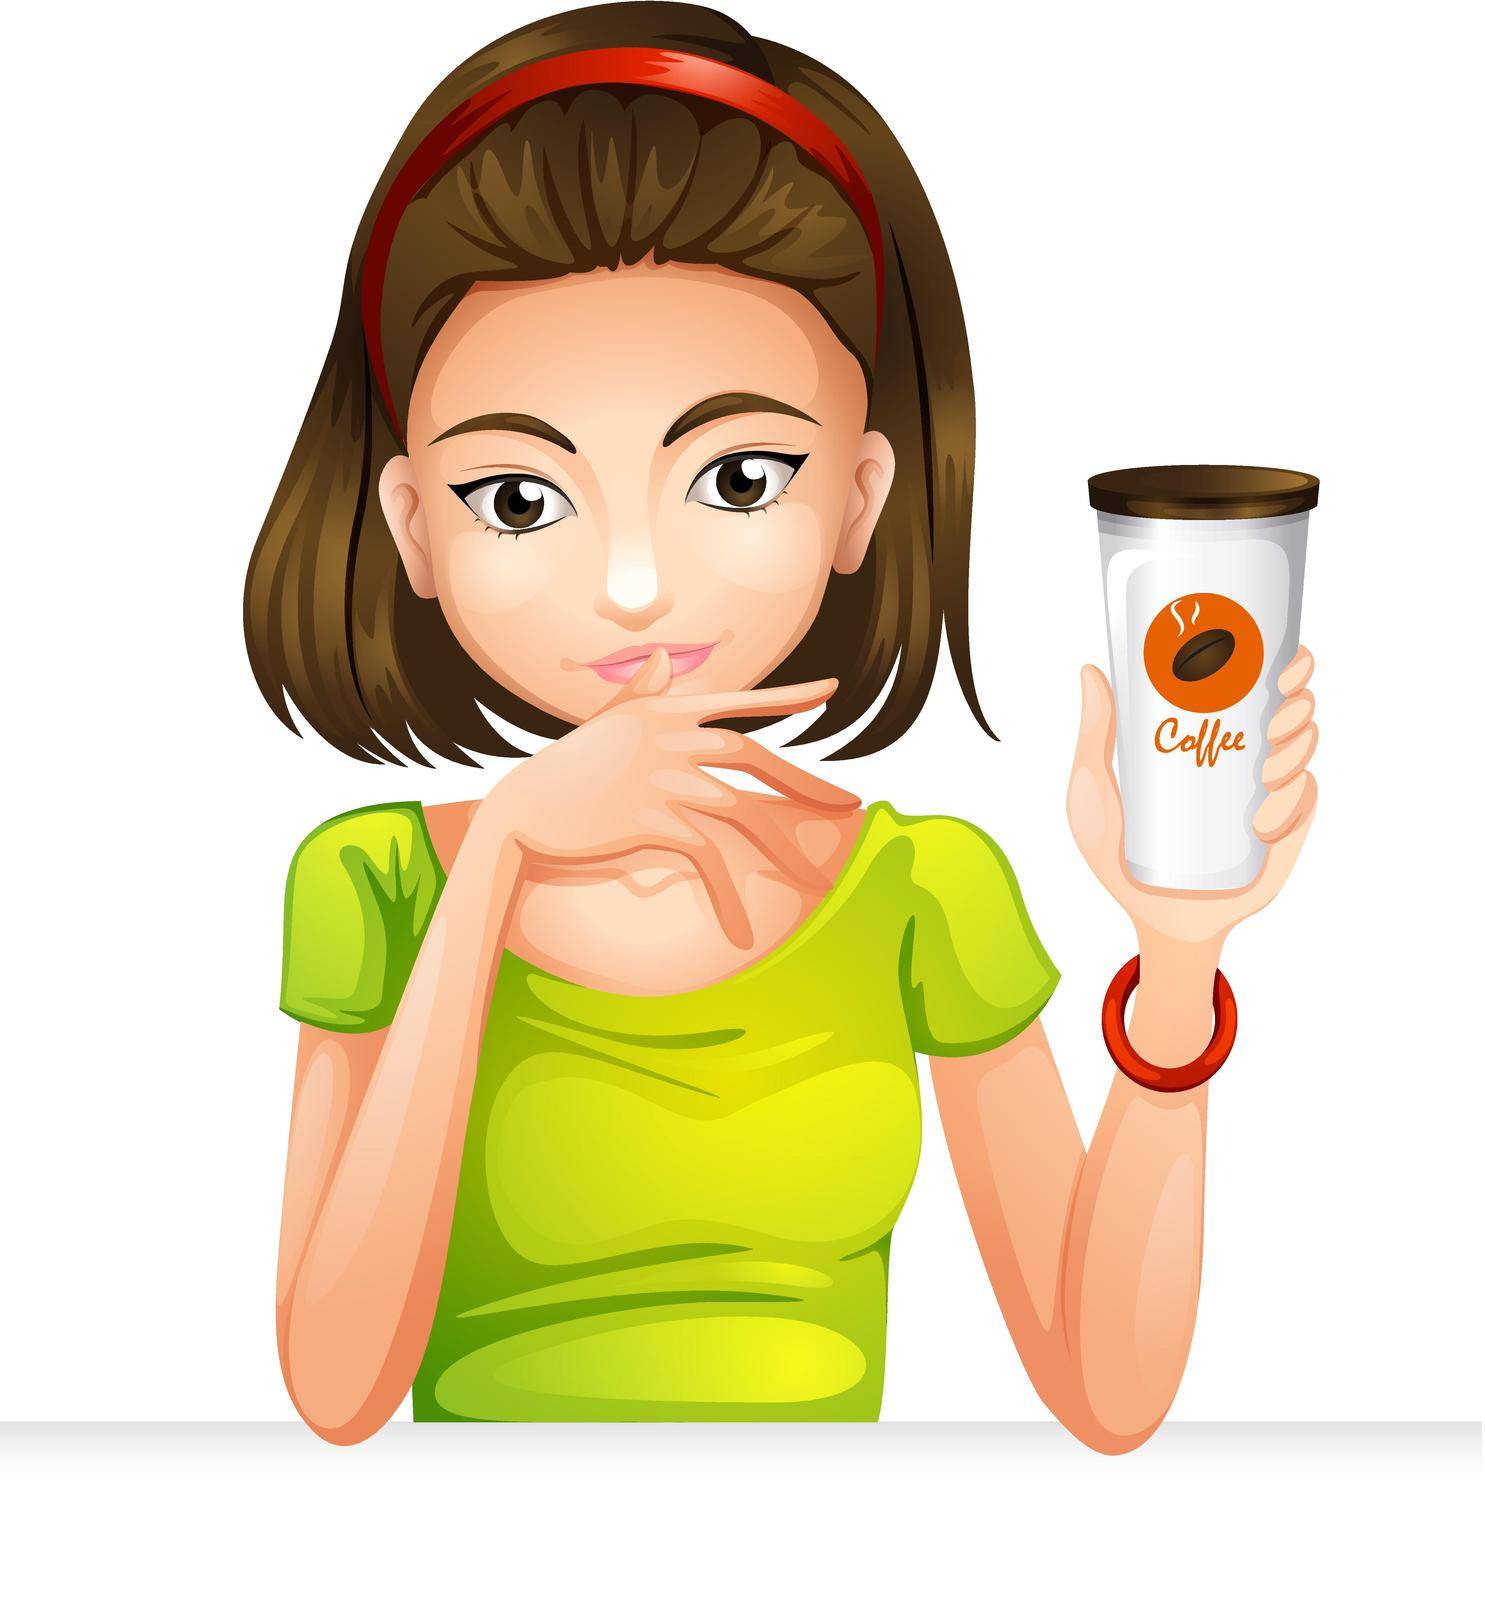 Illustration of a woman holding a glass of coffee on a white background